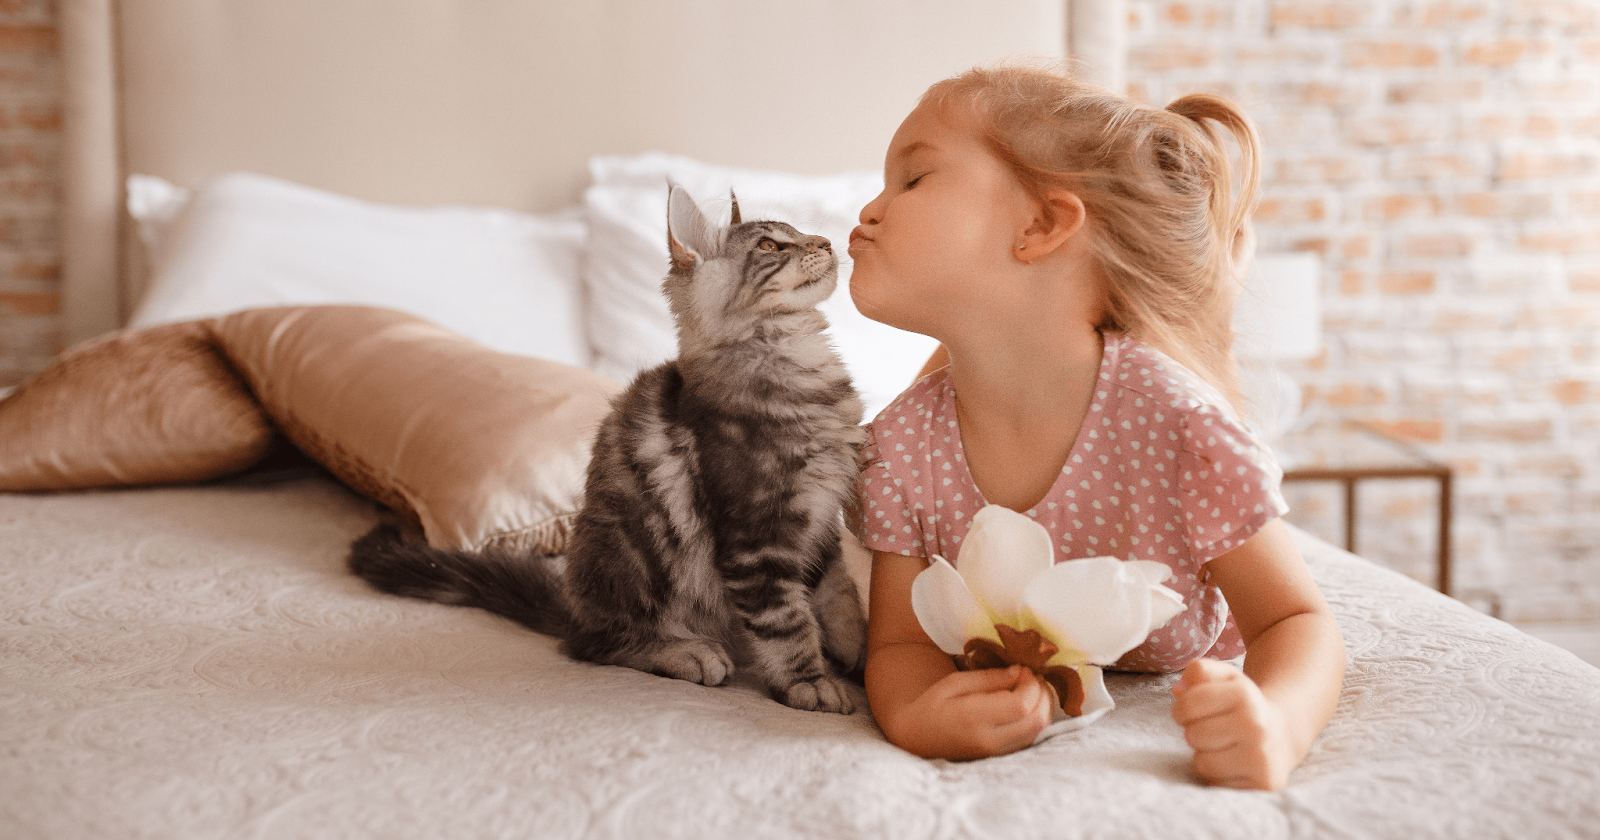 Young girl laying on a bed making a kiss face toward cat sitting beside her